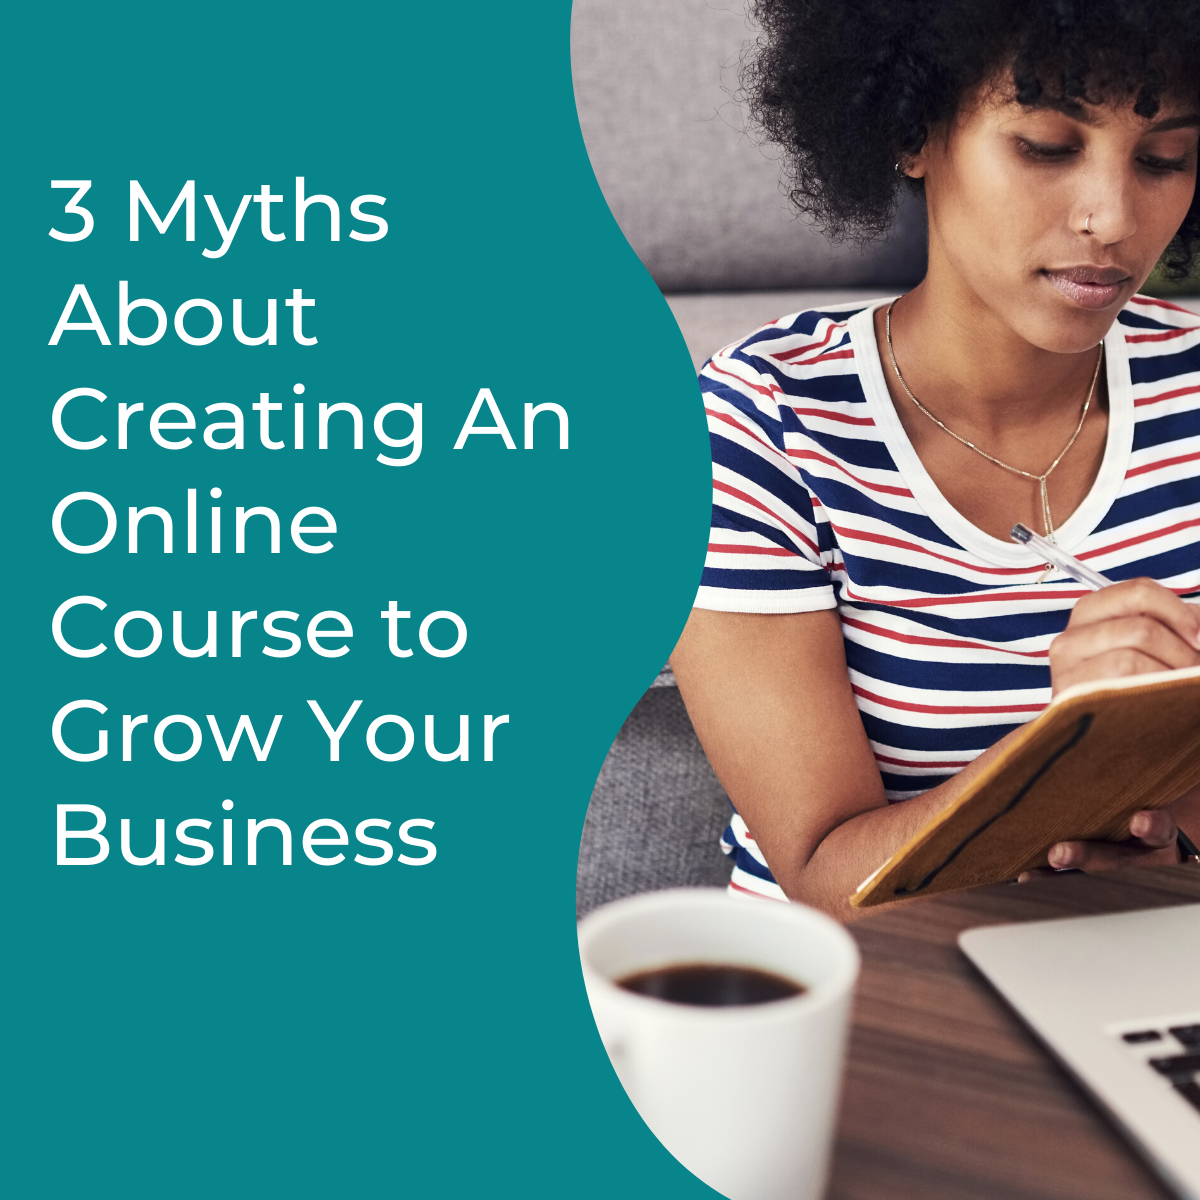 You are currently viewing 3 Myths About Creating An Online Course to Grow Your Business